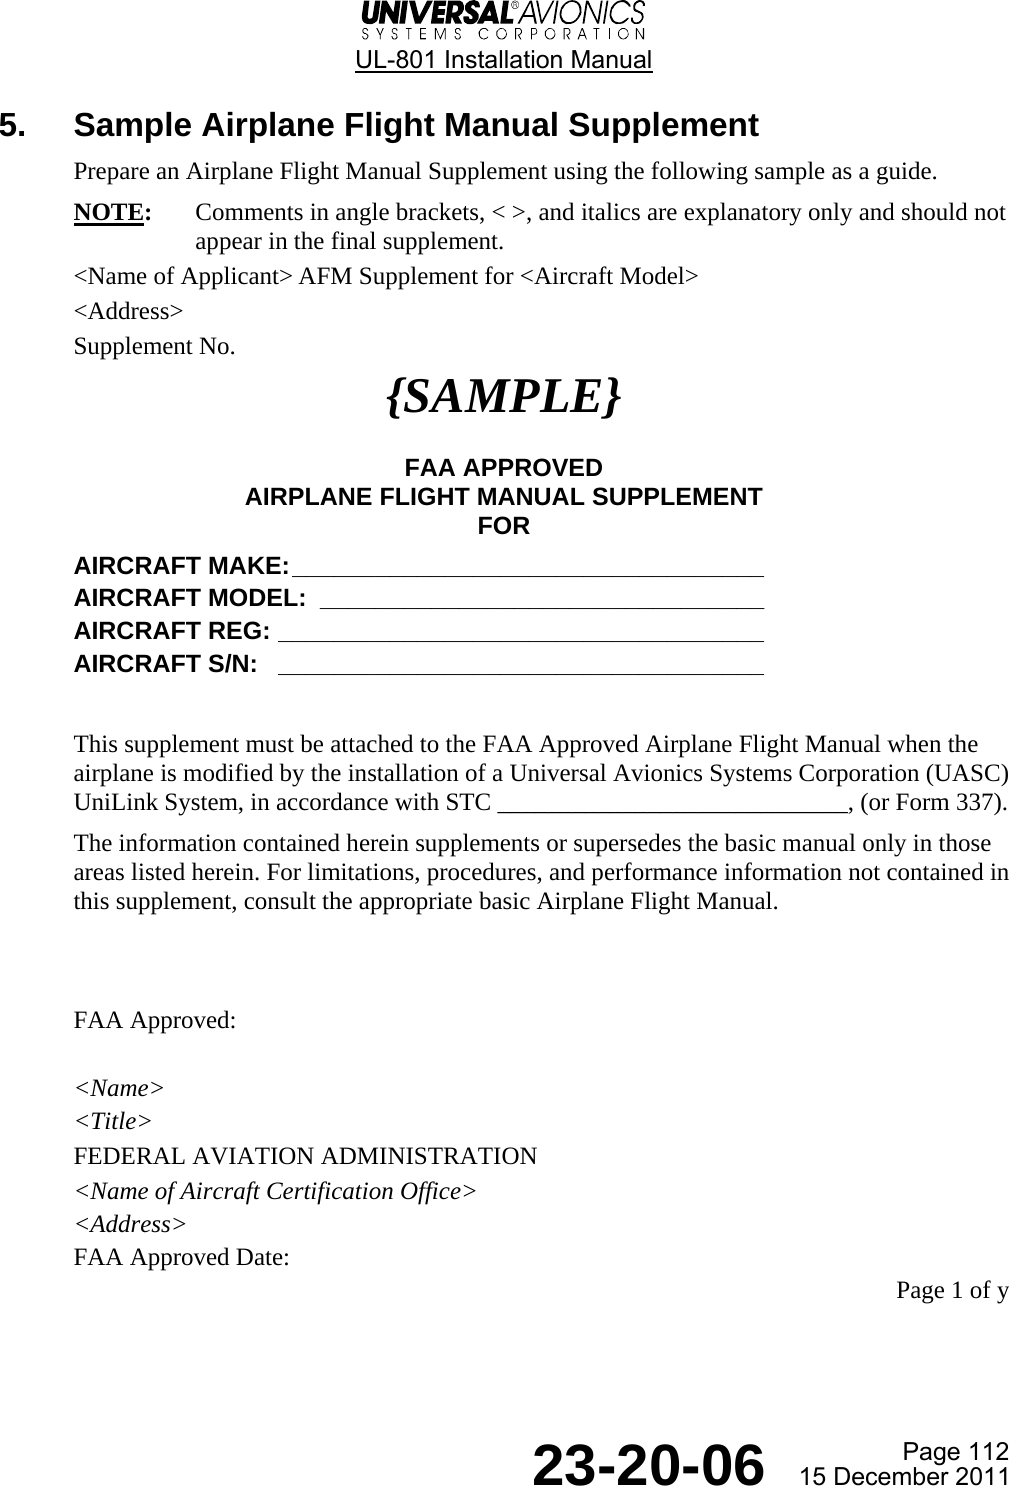  UL-801 Installation Manual Page 112  23-20-06  15 December 2011 5.  Sample Airplane Flight Manual Supplement Prepare an Airplane Flight Manual Supplement using the following sample as a guide. NOTE:  Comments in angle brackets, &lt; &gt;, and italics are explanatory only and should not appear in the final supplement. &lt;Name of Applicant&gt; AFM Supplement for &lt;Aircraft Model&gt; &lt;Address&gt; Supplement No. {SAMPLE}  FAA APPROVED AIRPLANE FLIGHT MANUAL SUPPLEMENT FOR AIRCRAFT MAKE: __________________________________  AIRCRAFT MODEL:  ________________________________  AIRCRAFT REG: ___________________________________  AIRCRAFT S/N:   ___________________________________   This supplement must be attached to the FAA Approved Airplane Flight Manual when the airplane is modified by the installation of a Universal Avionics Systems Corporation (UASC) UniLink System, in accordance with STC ____________________________, (or Form 337). The information contained herein supplements or supersedes the basic manual only in those areas listed herein. For limitations, procedures, and performance information not contained in this supplement, consult the appropriate basic Airplane Flight Manual.   FAA Approved:  &lt;Name&gt; &lt;Title&gt; FEDERAL AVIATION ADMINISTRATION &lt;Name of Aircraft Certification Office&gt; &lt;Address&gt; FAA Approved Date: Page 1 of y 